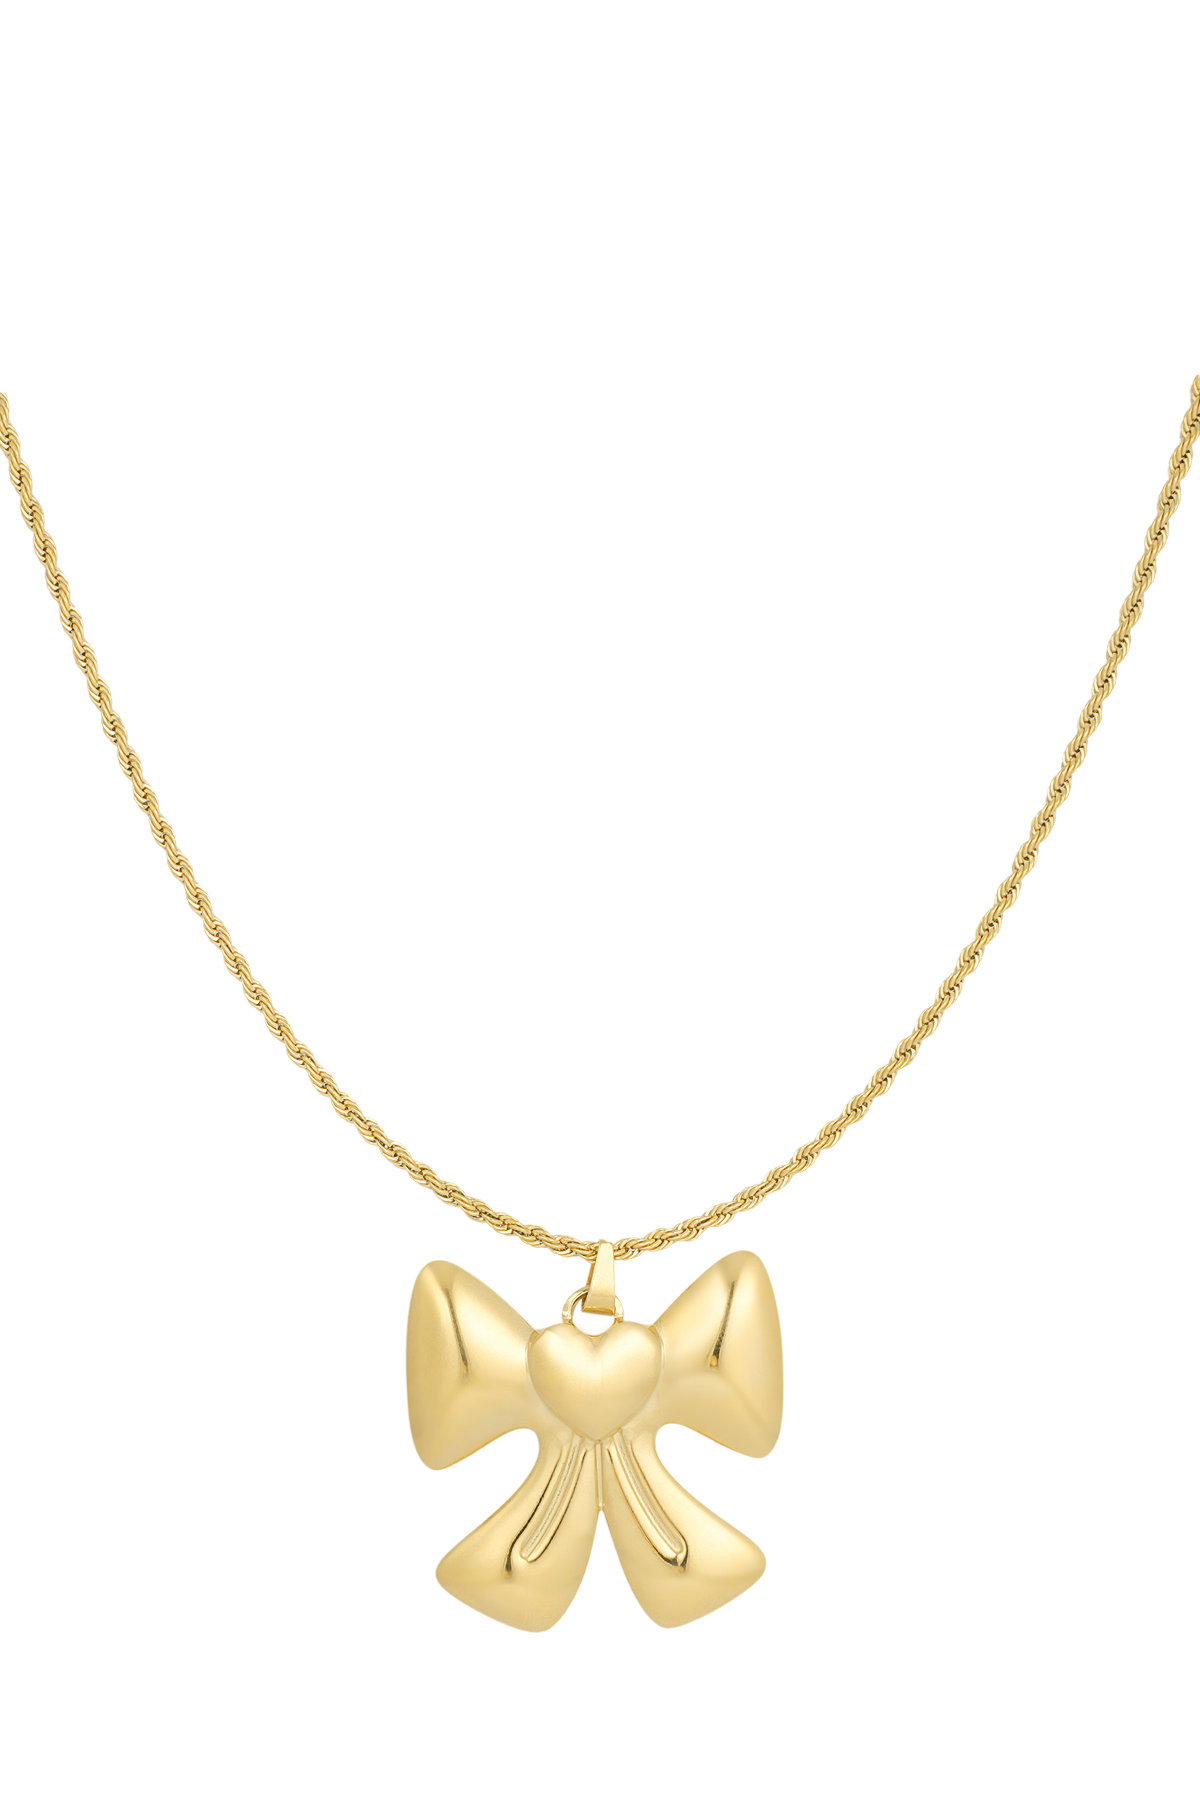 Necklace bow lover - gold h5 